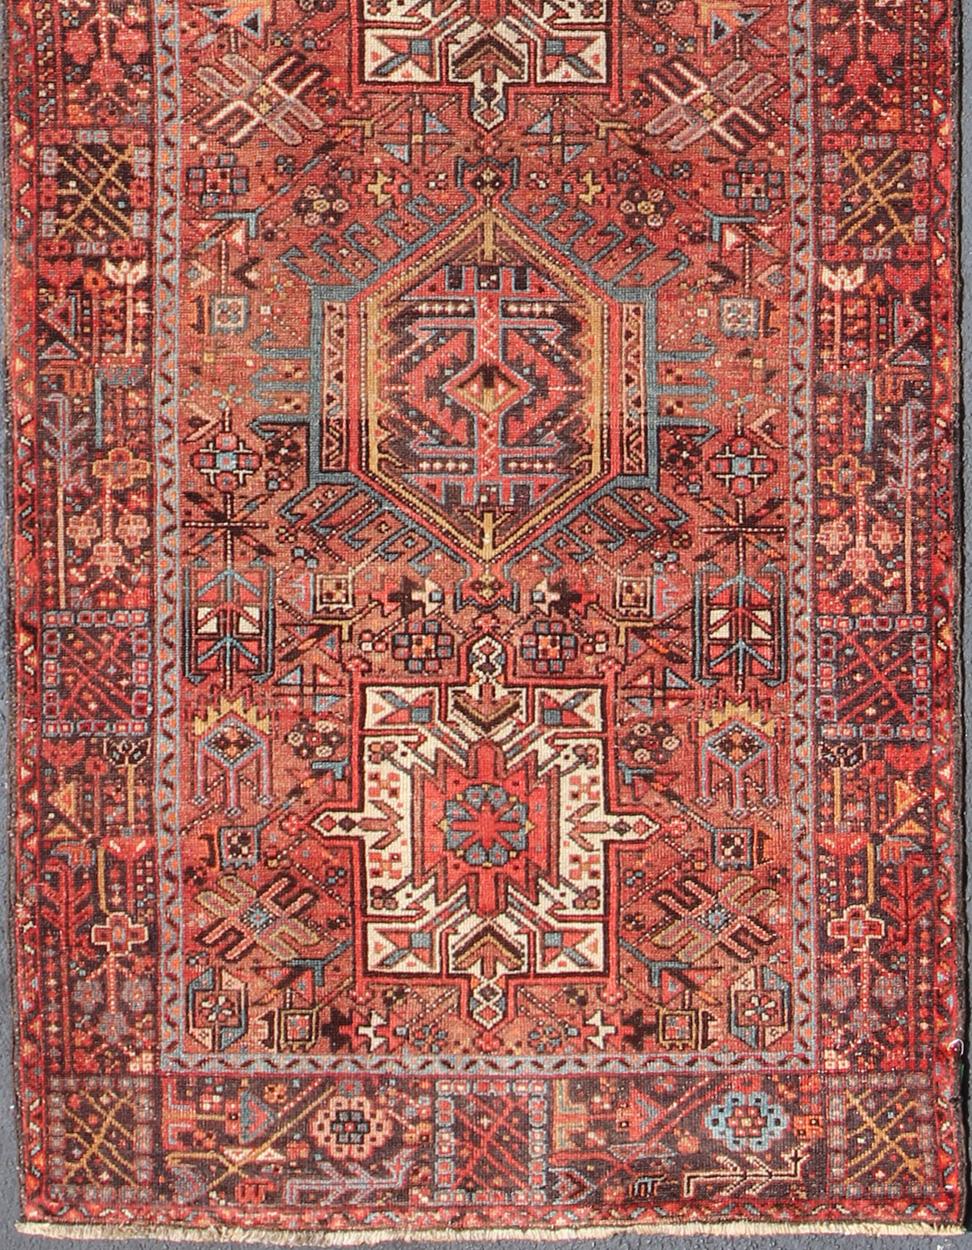 Geometric Medallion design multicolored vintage Persian Karadjeh runner, rug KB-H-604-16, country of origin / type: Iran / Karadjeh, circa 1940.

This, handwoven vintage Persian Karadjeh wide runner features a soft red-colored field imbued with a